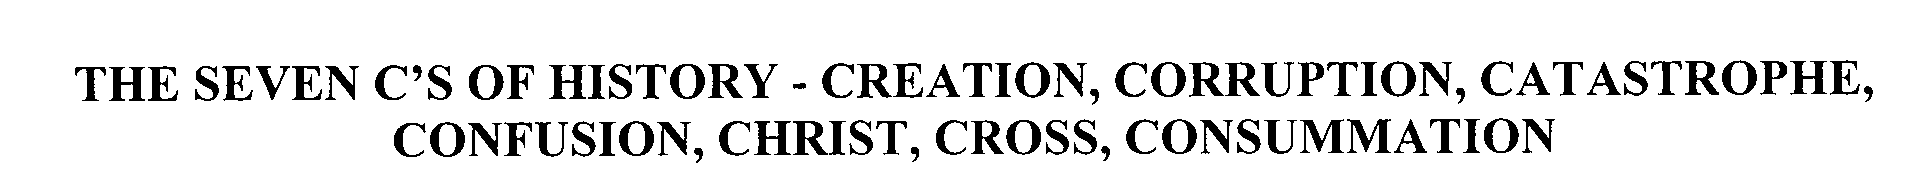  THE SEVEN C'S OF HISTORY- CREATION, CORRUPTION, CATASTROPHE, CONFUSION, CHRIST, CROSS, CONSUMMATION